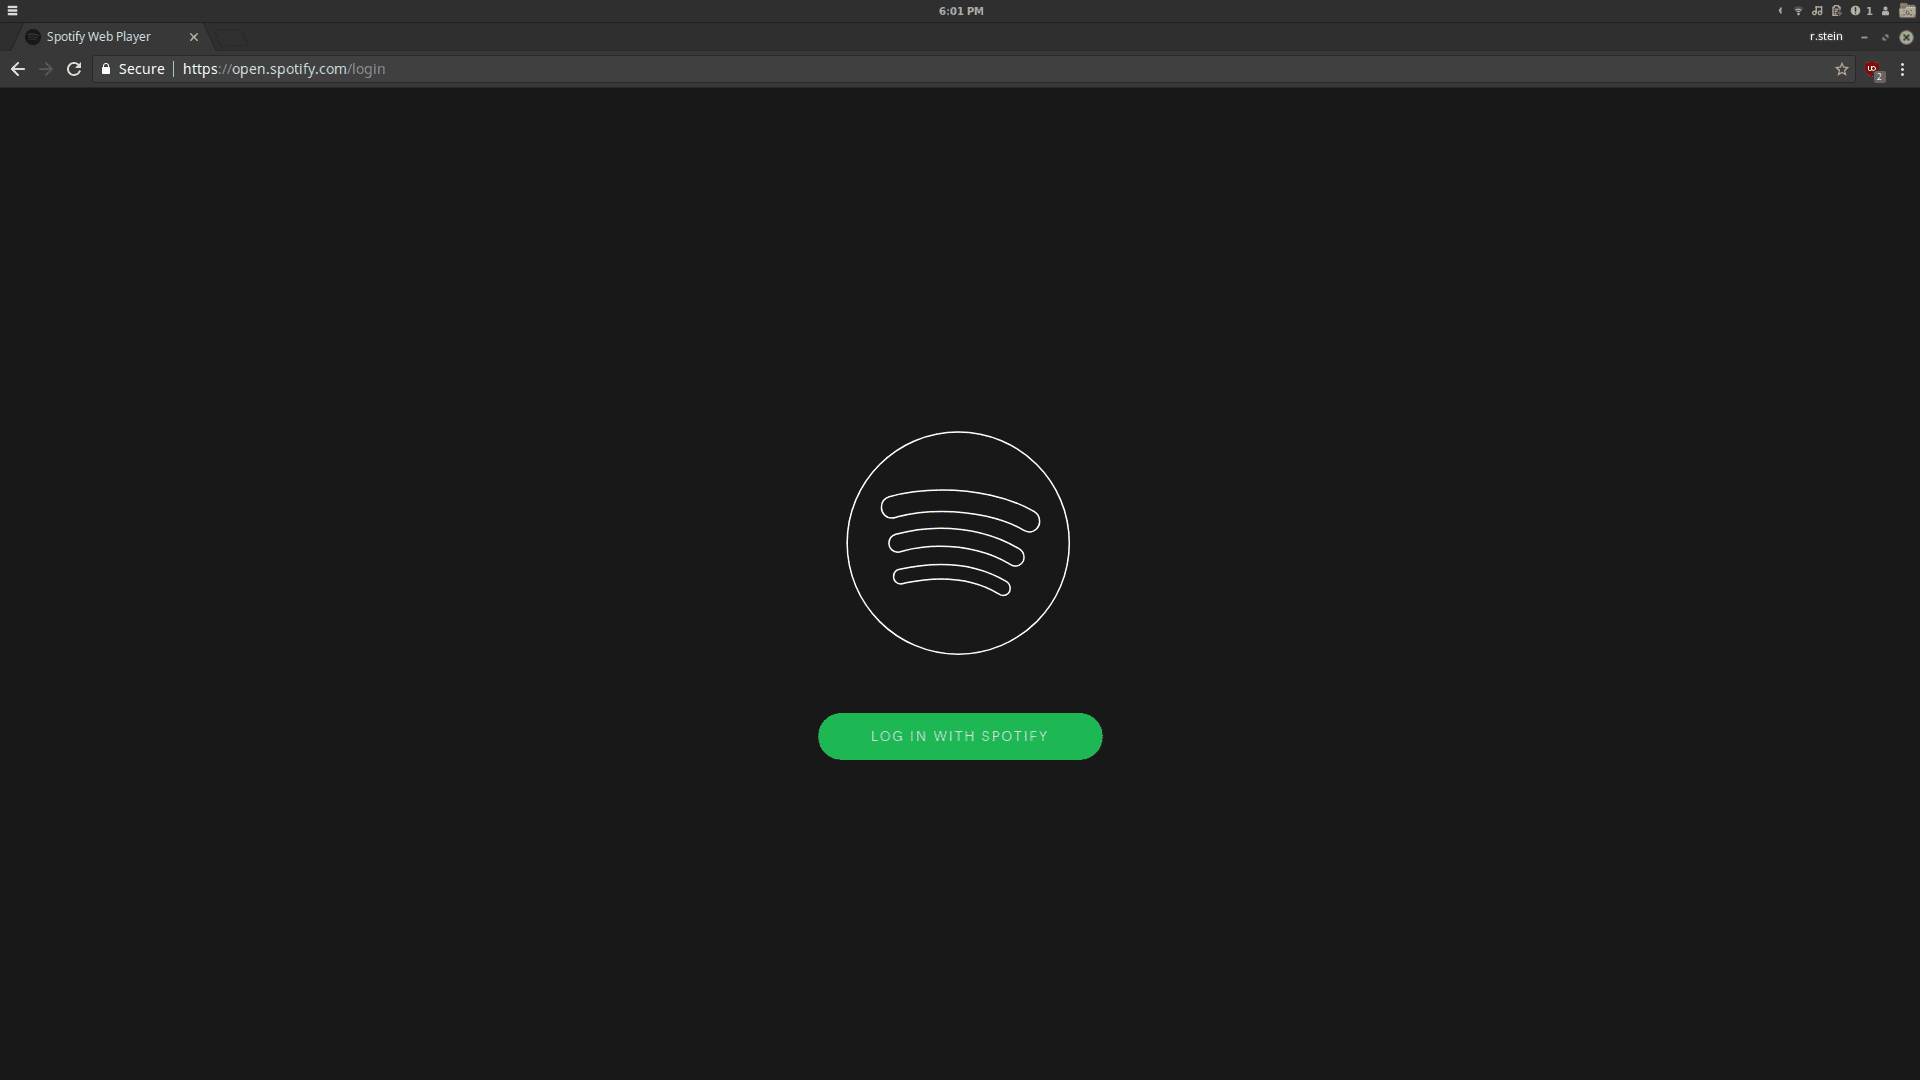 Spotify Web Player login  How To Use Online In Browser - 6